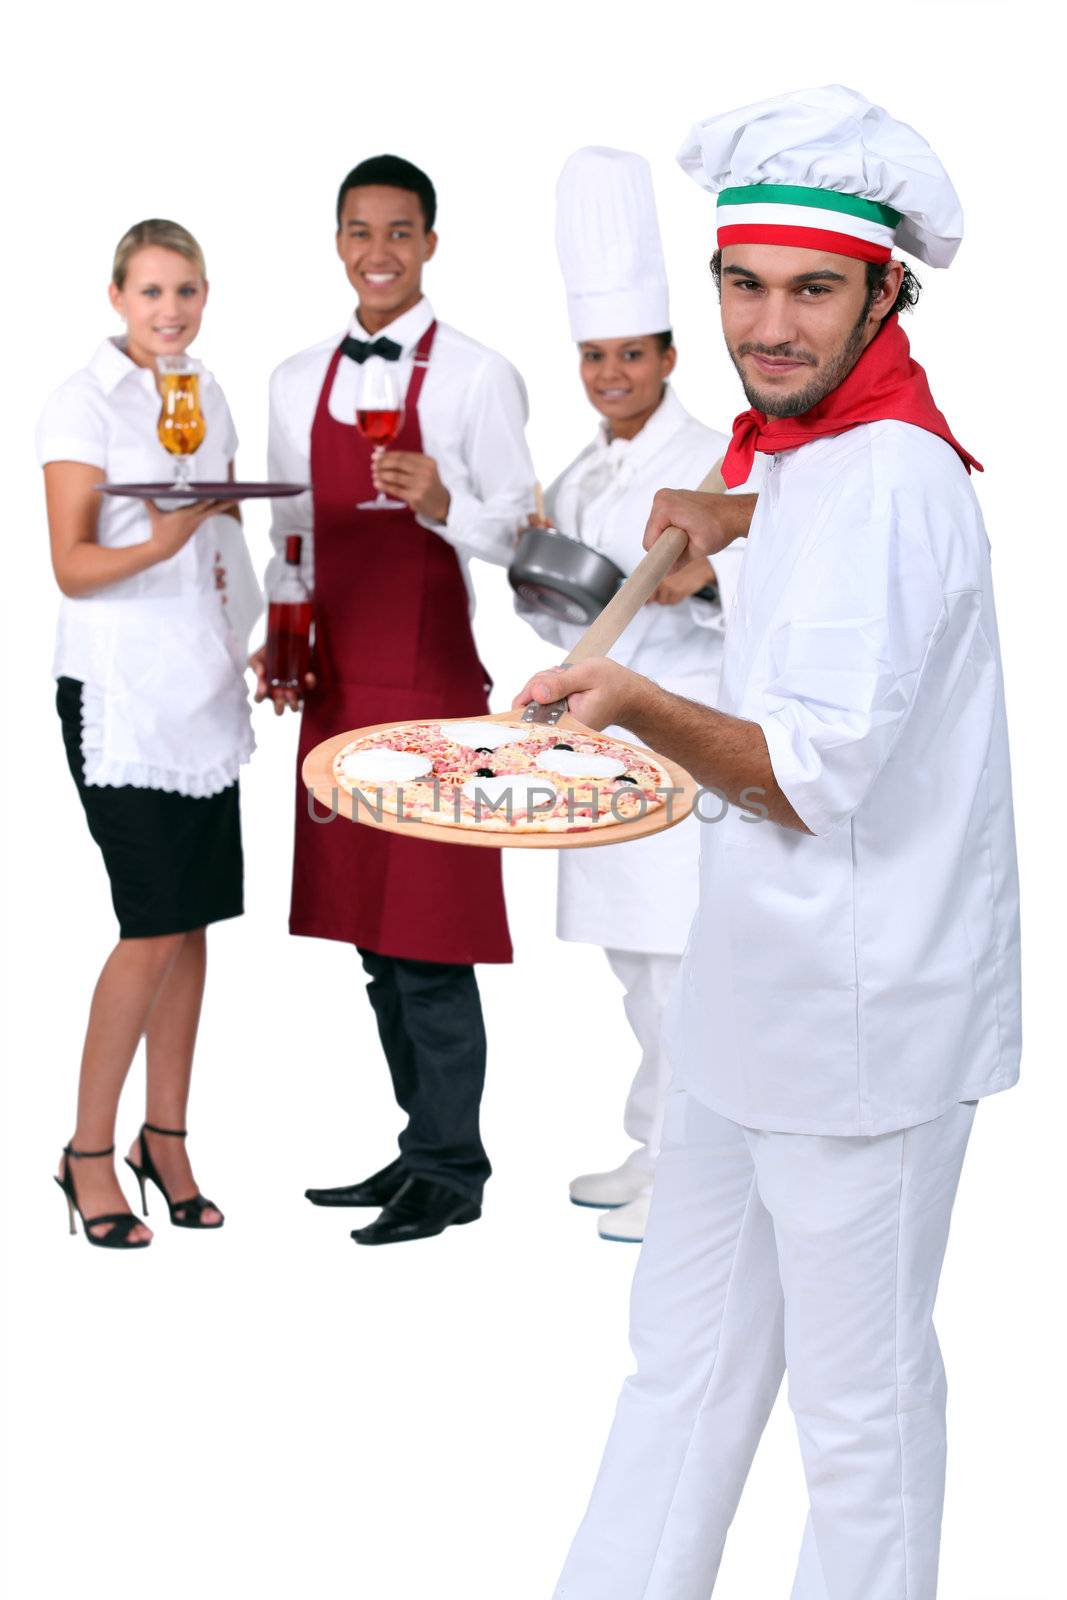 Italian pizza chef and restaurant staff by phovoir